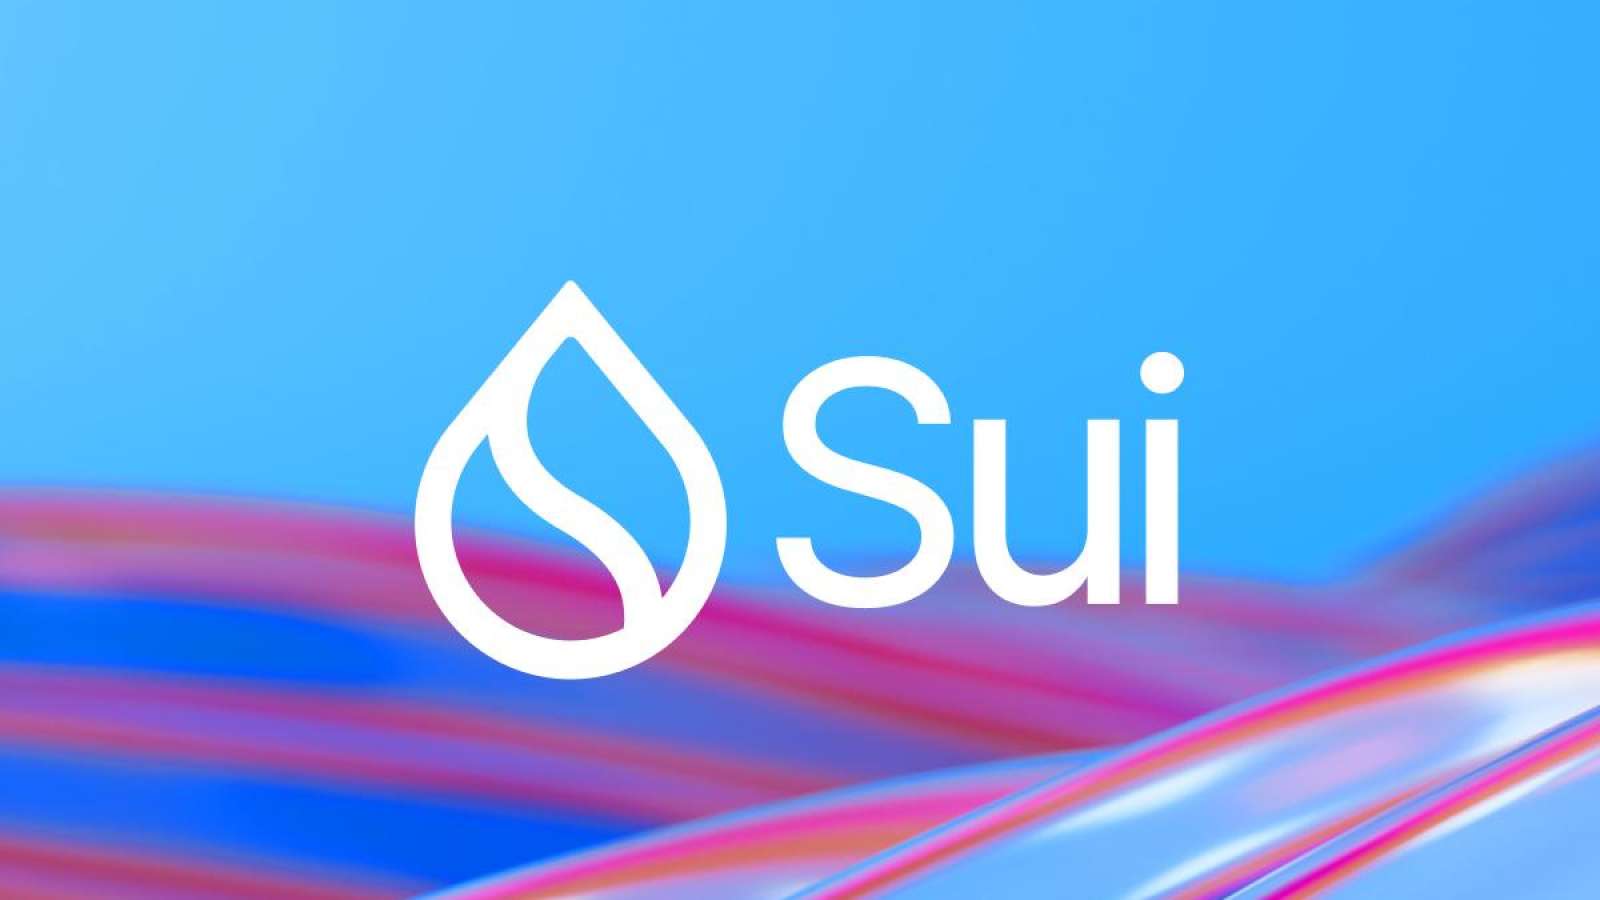 Sui Spikes in Weekly DEX Volume, Joins Top 10 of All Blockchains